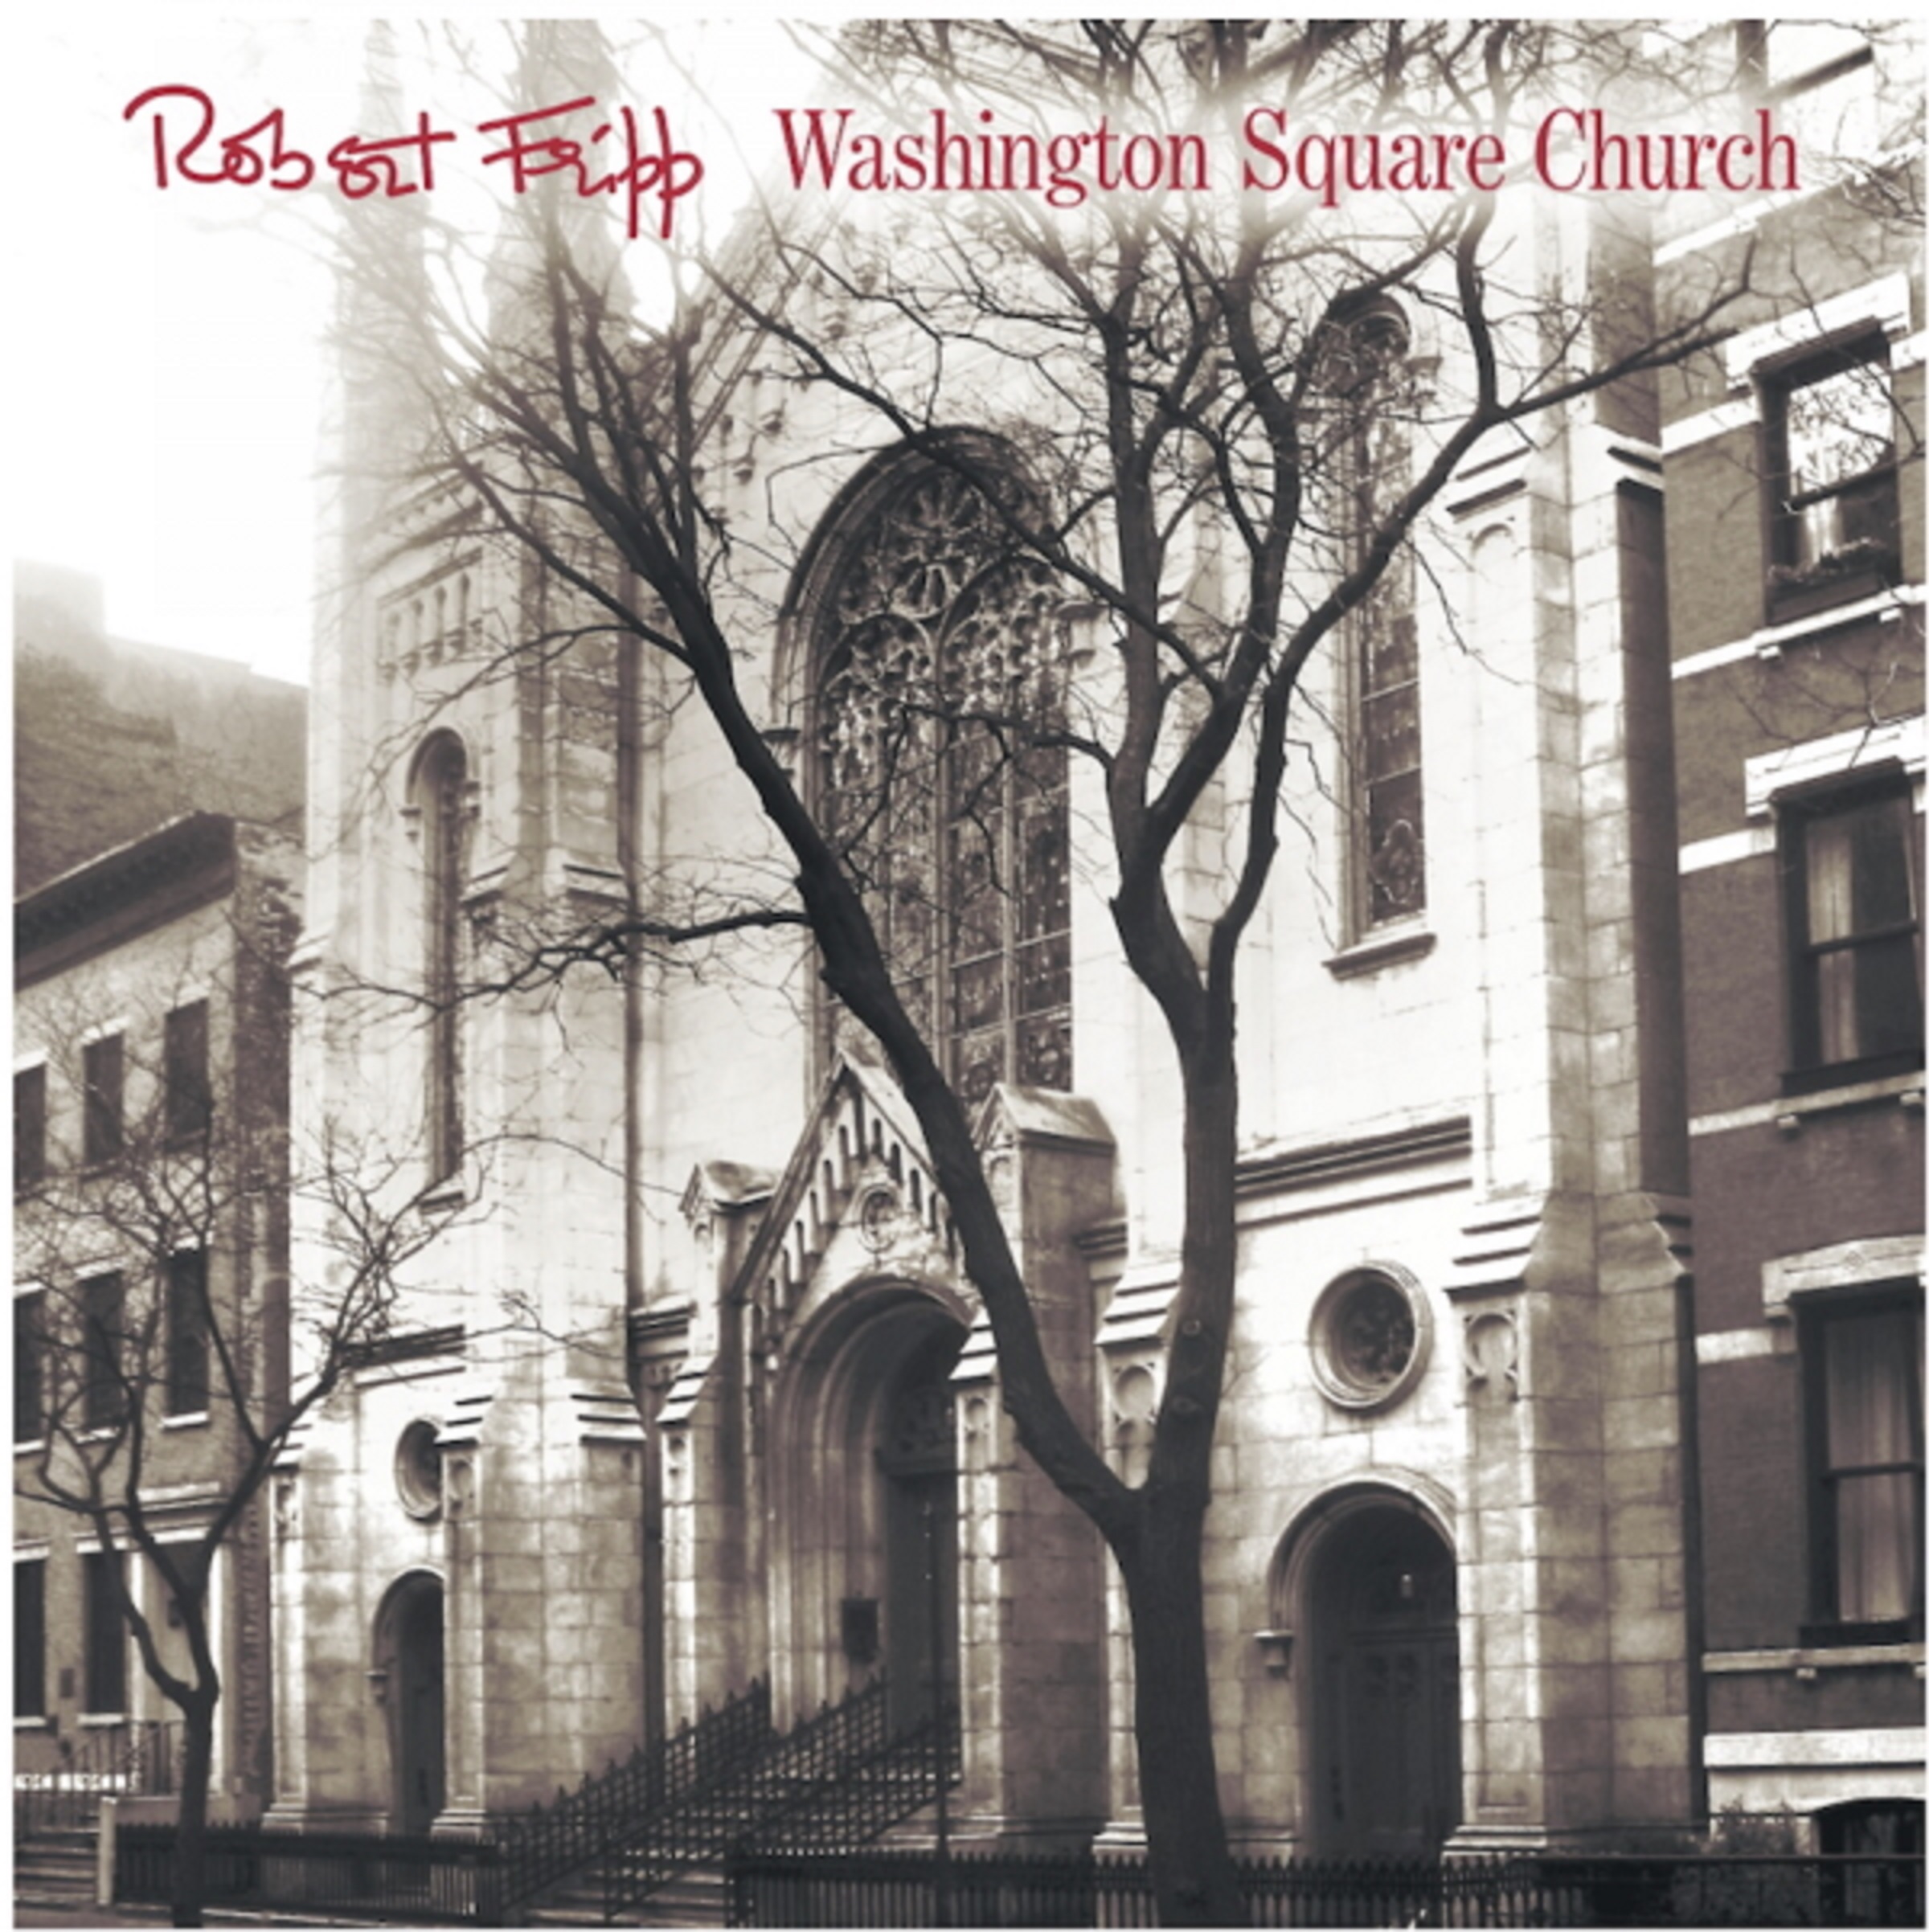 Robert Fripp “Washington Square Church” CD/DVD To Be Released April 29, 2022